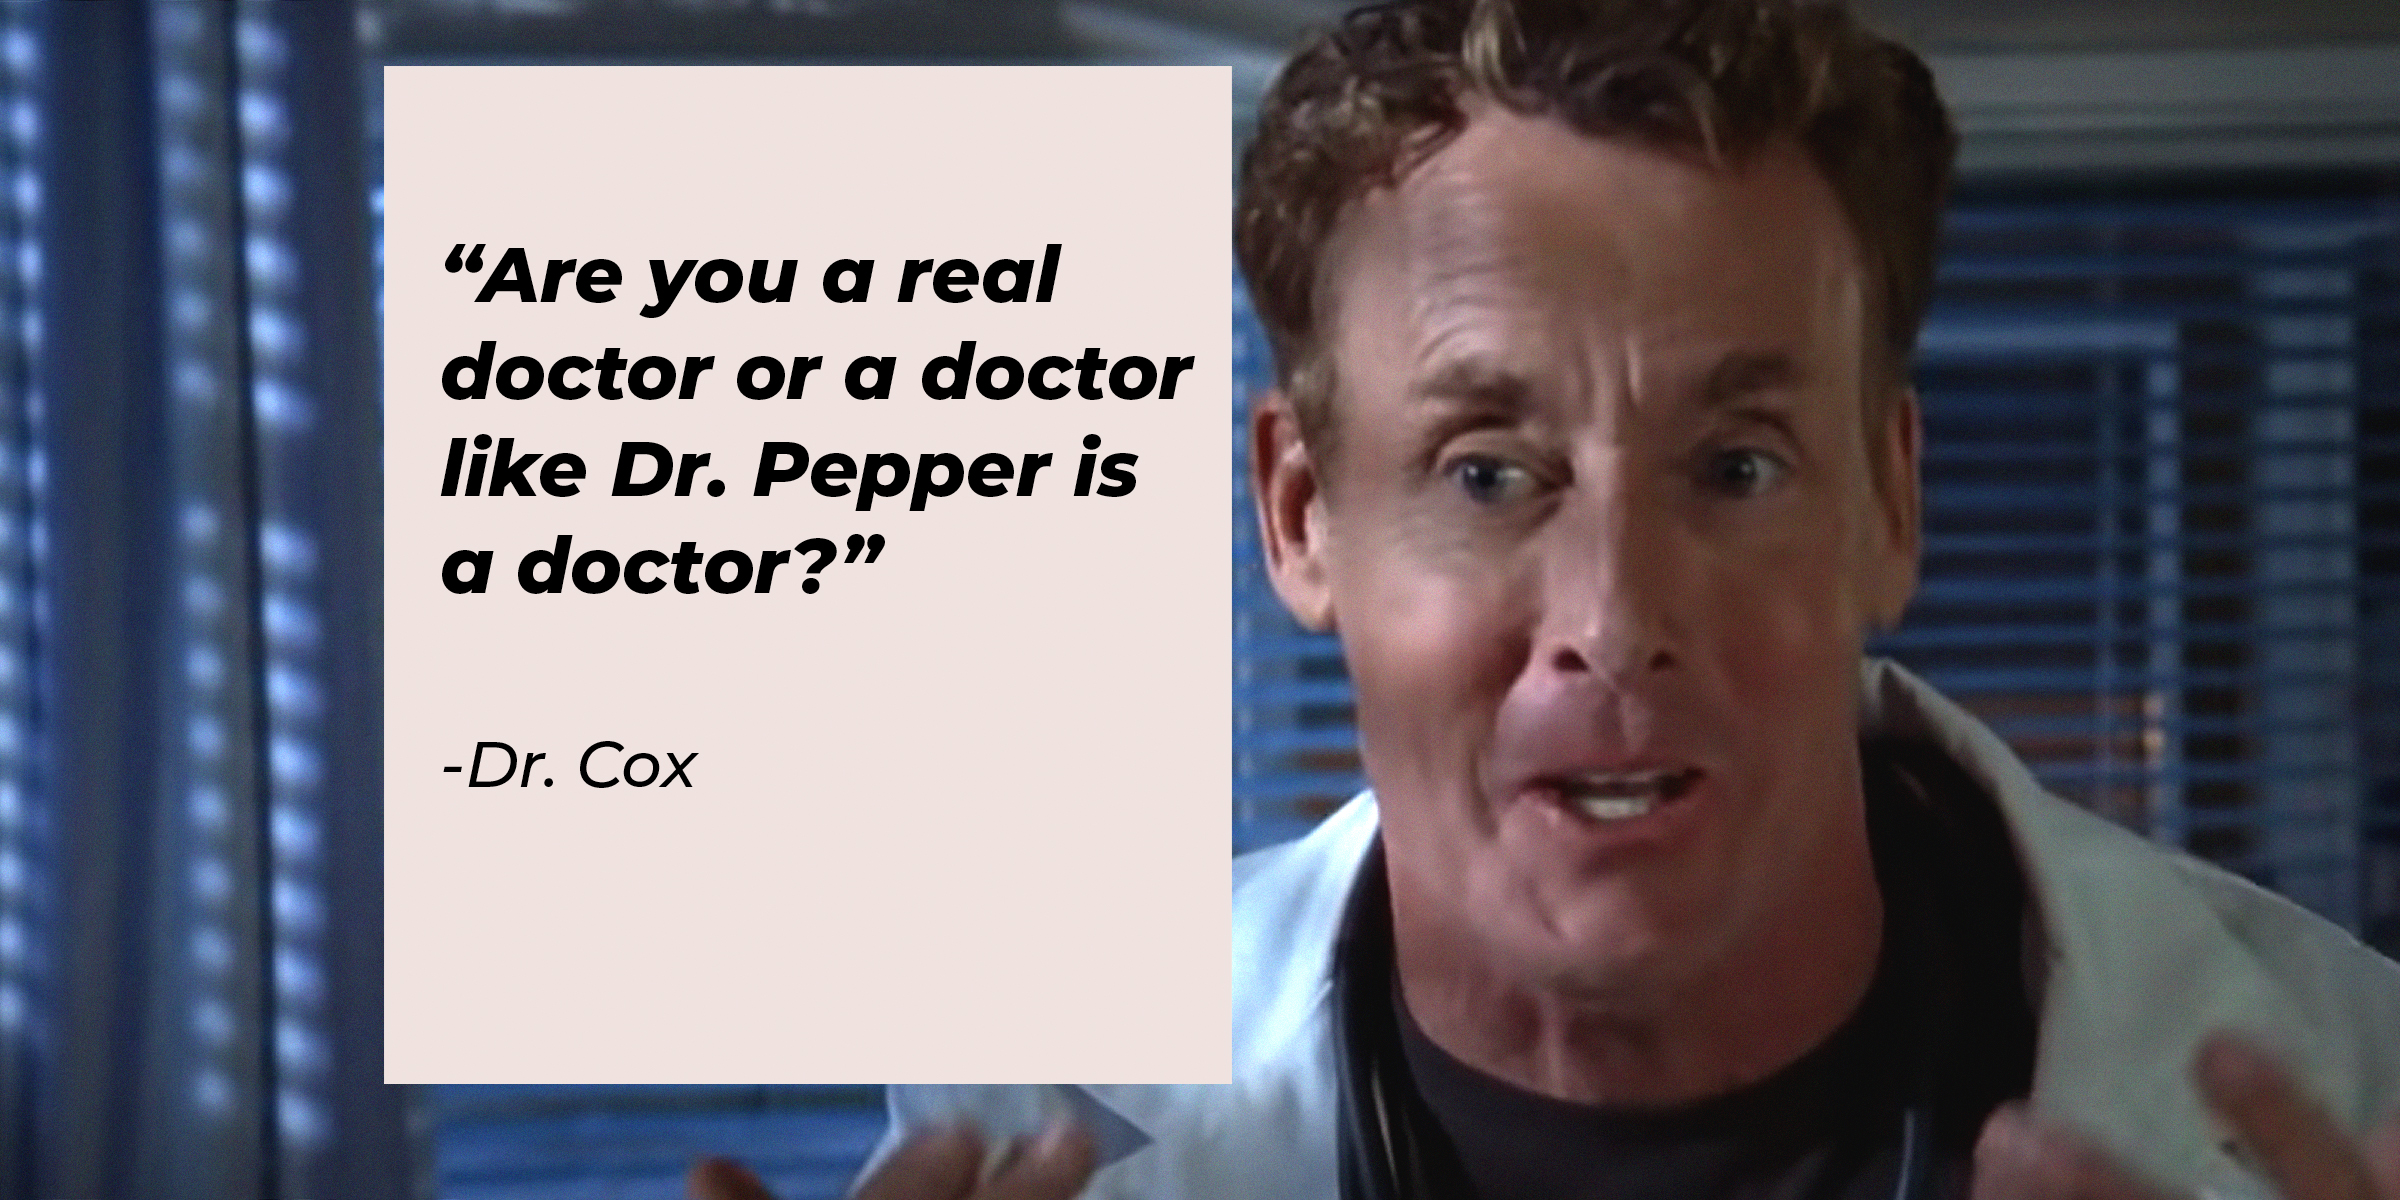 Dr. Cox, with his quote: "Are you a real doctor or a doctor like Dr. Pepper is a doctor?” | Source: facebook.com/scrubs